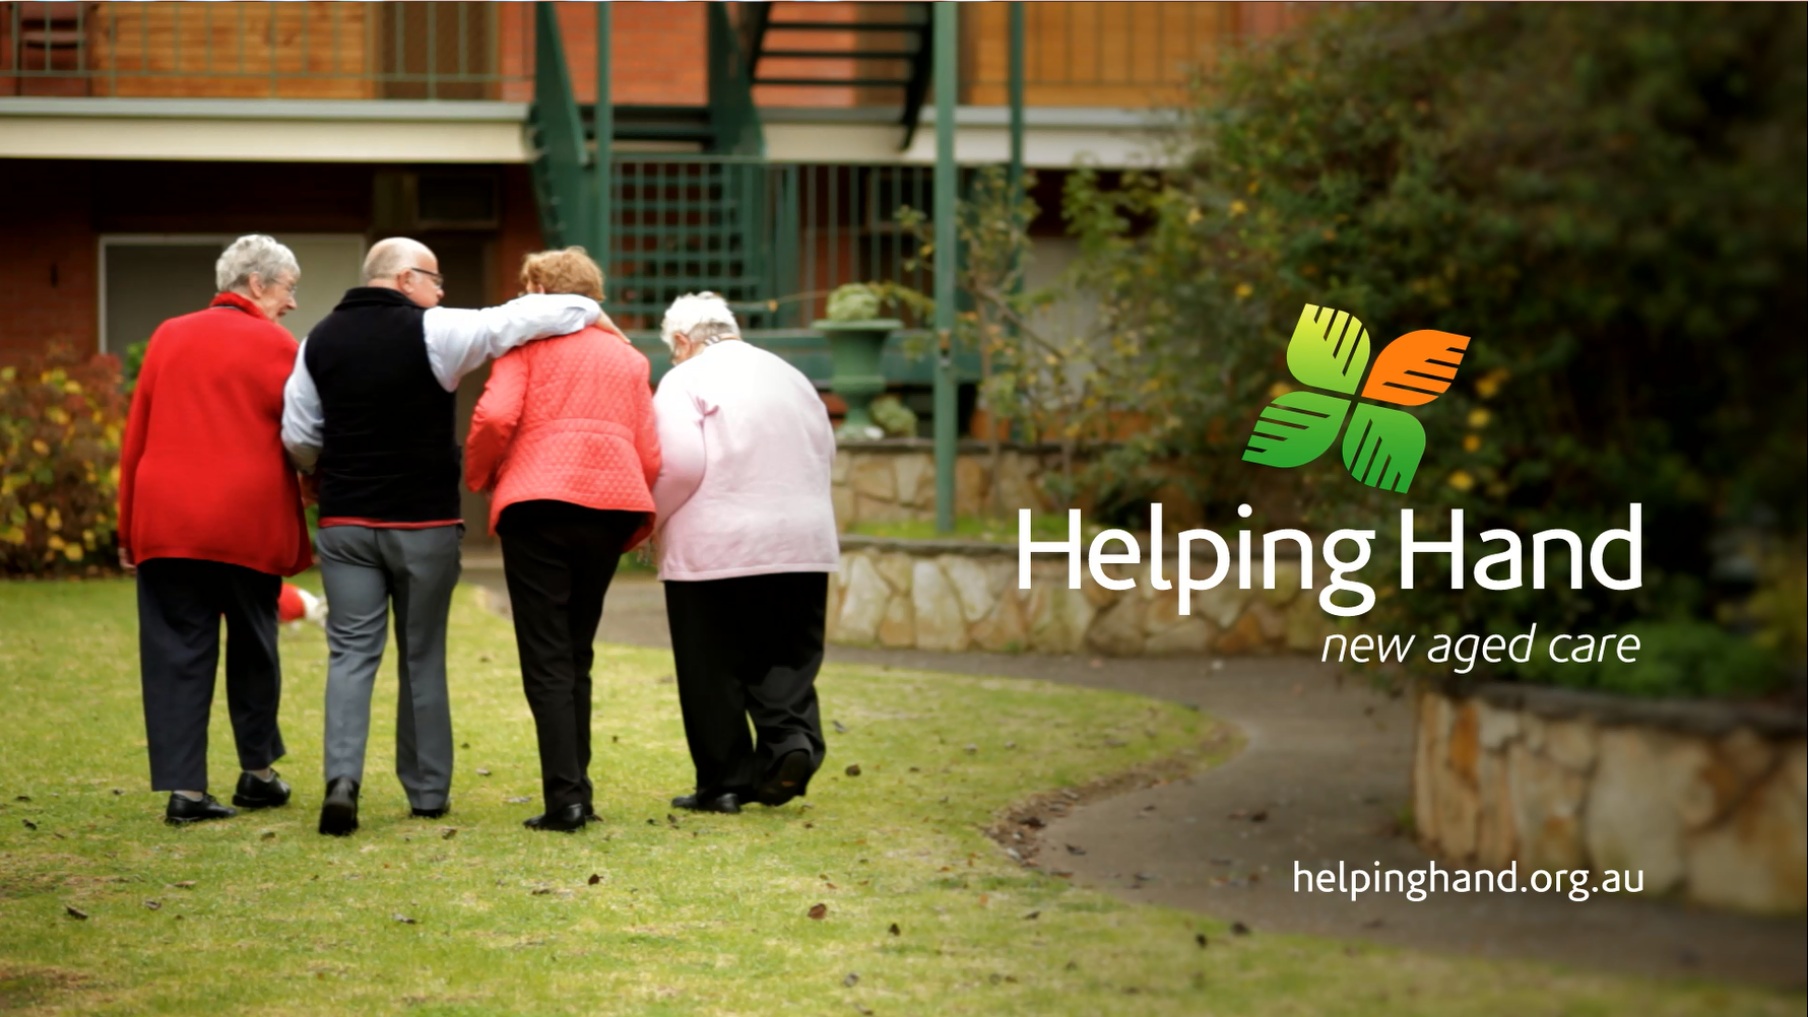 Helping Hand: Free Aged Care Information Sessions